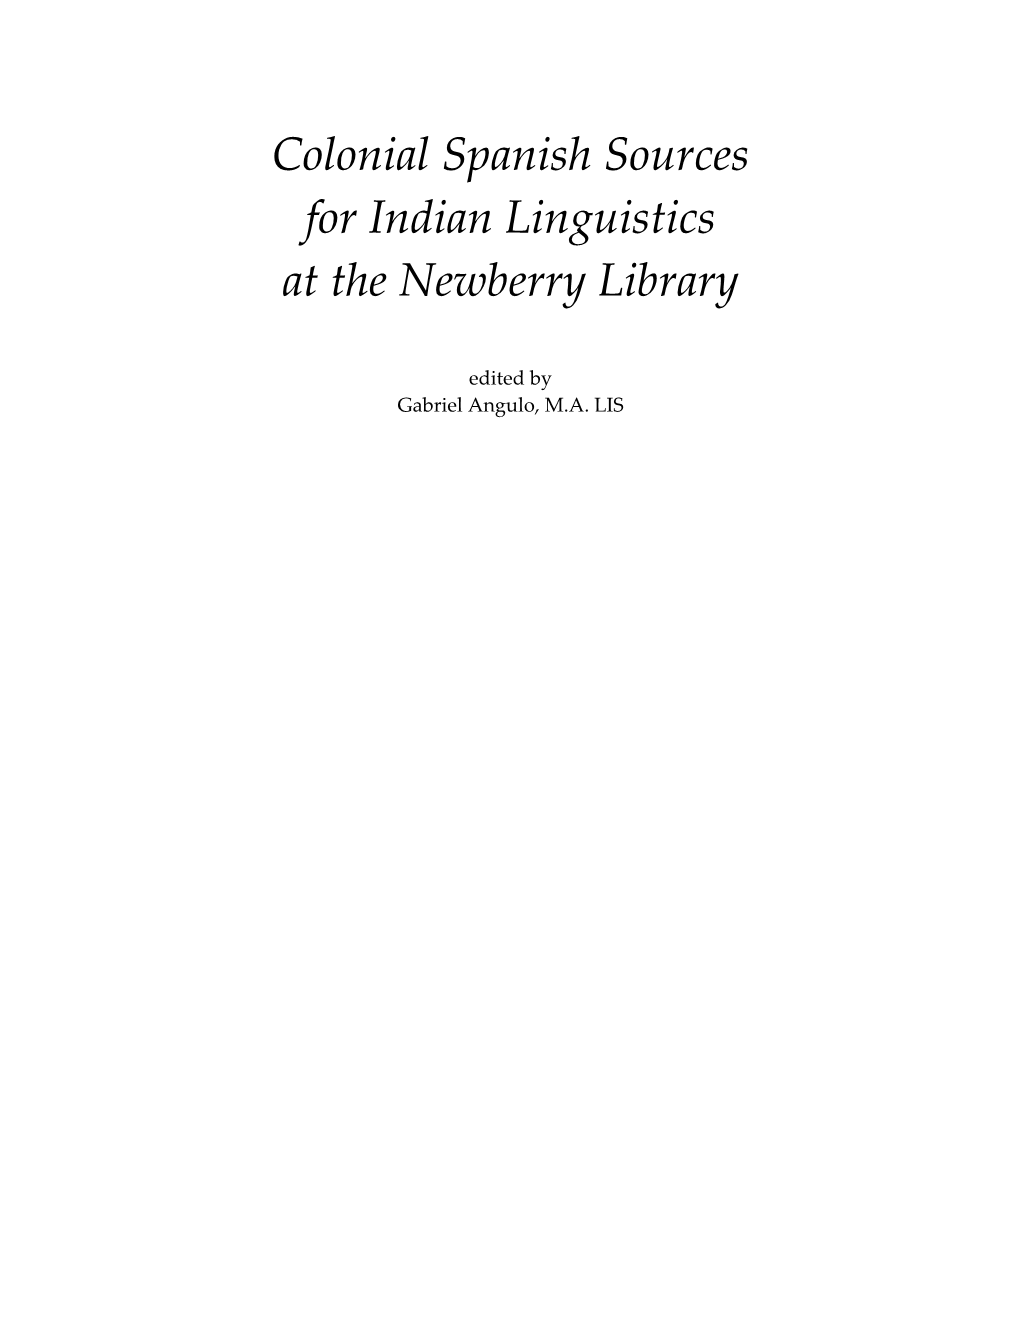 Colonial Spanish Sources for Indian Linguistics at the Newberry Library